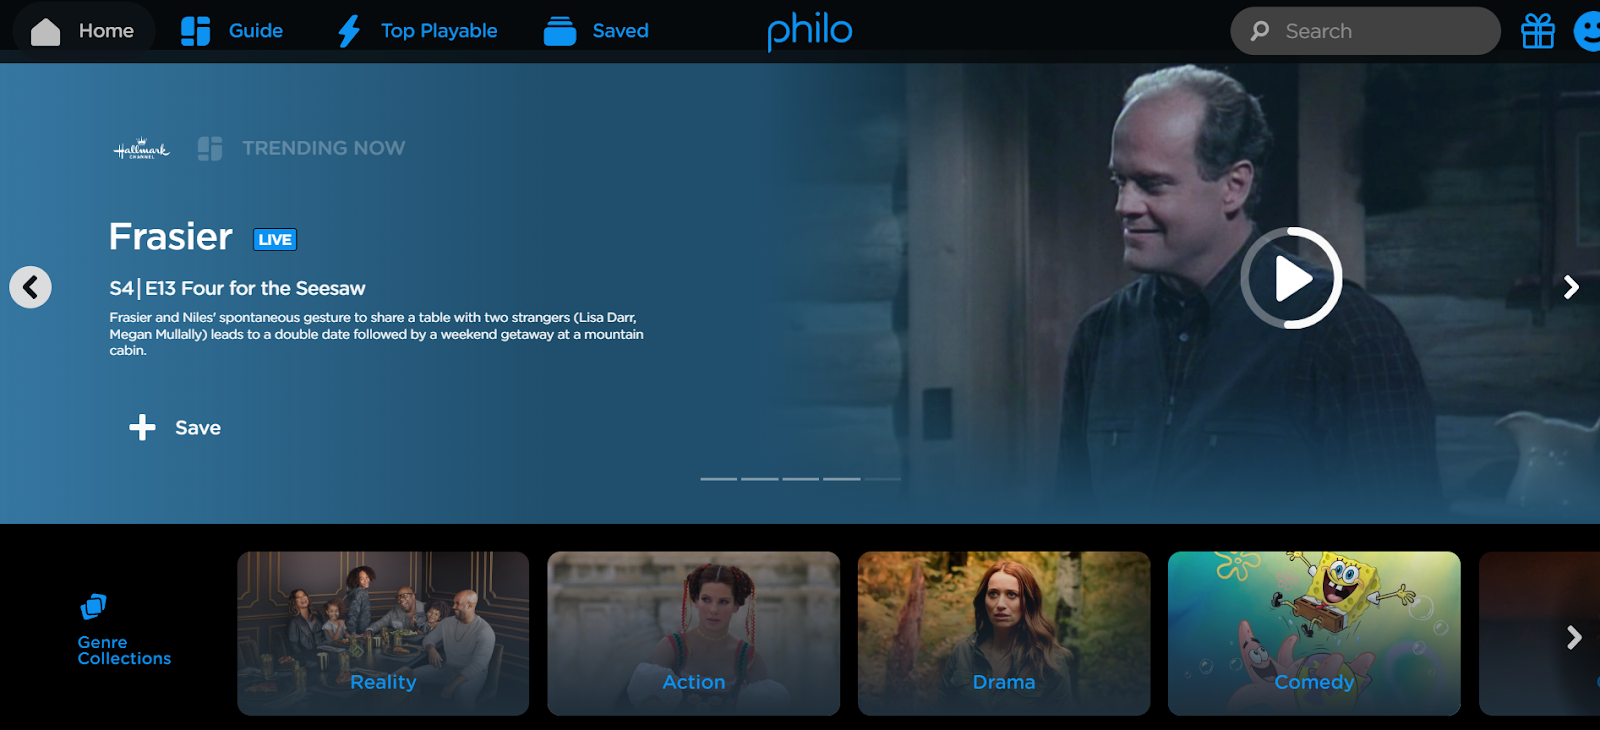 philo-home-page